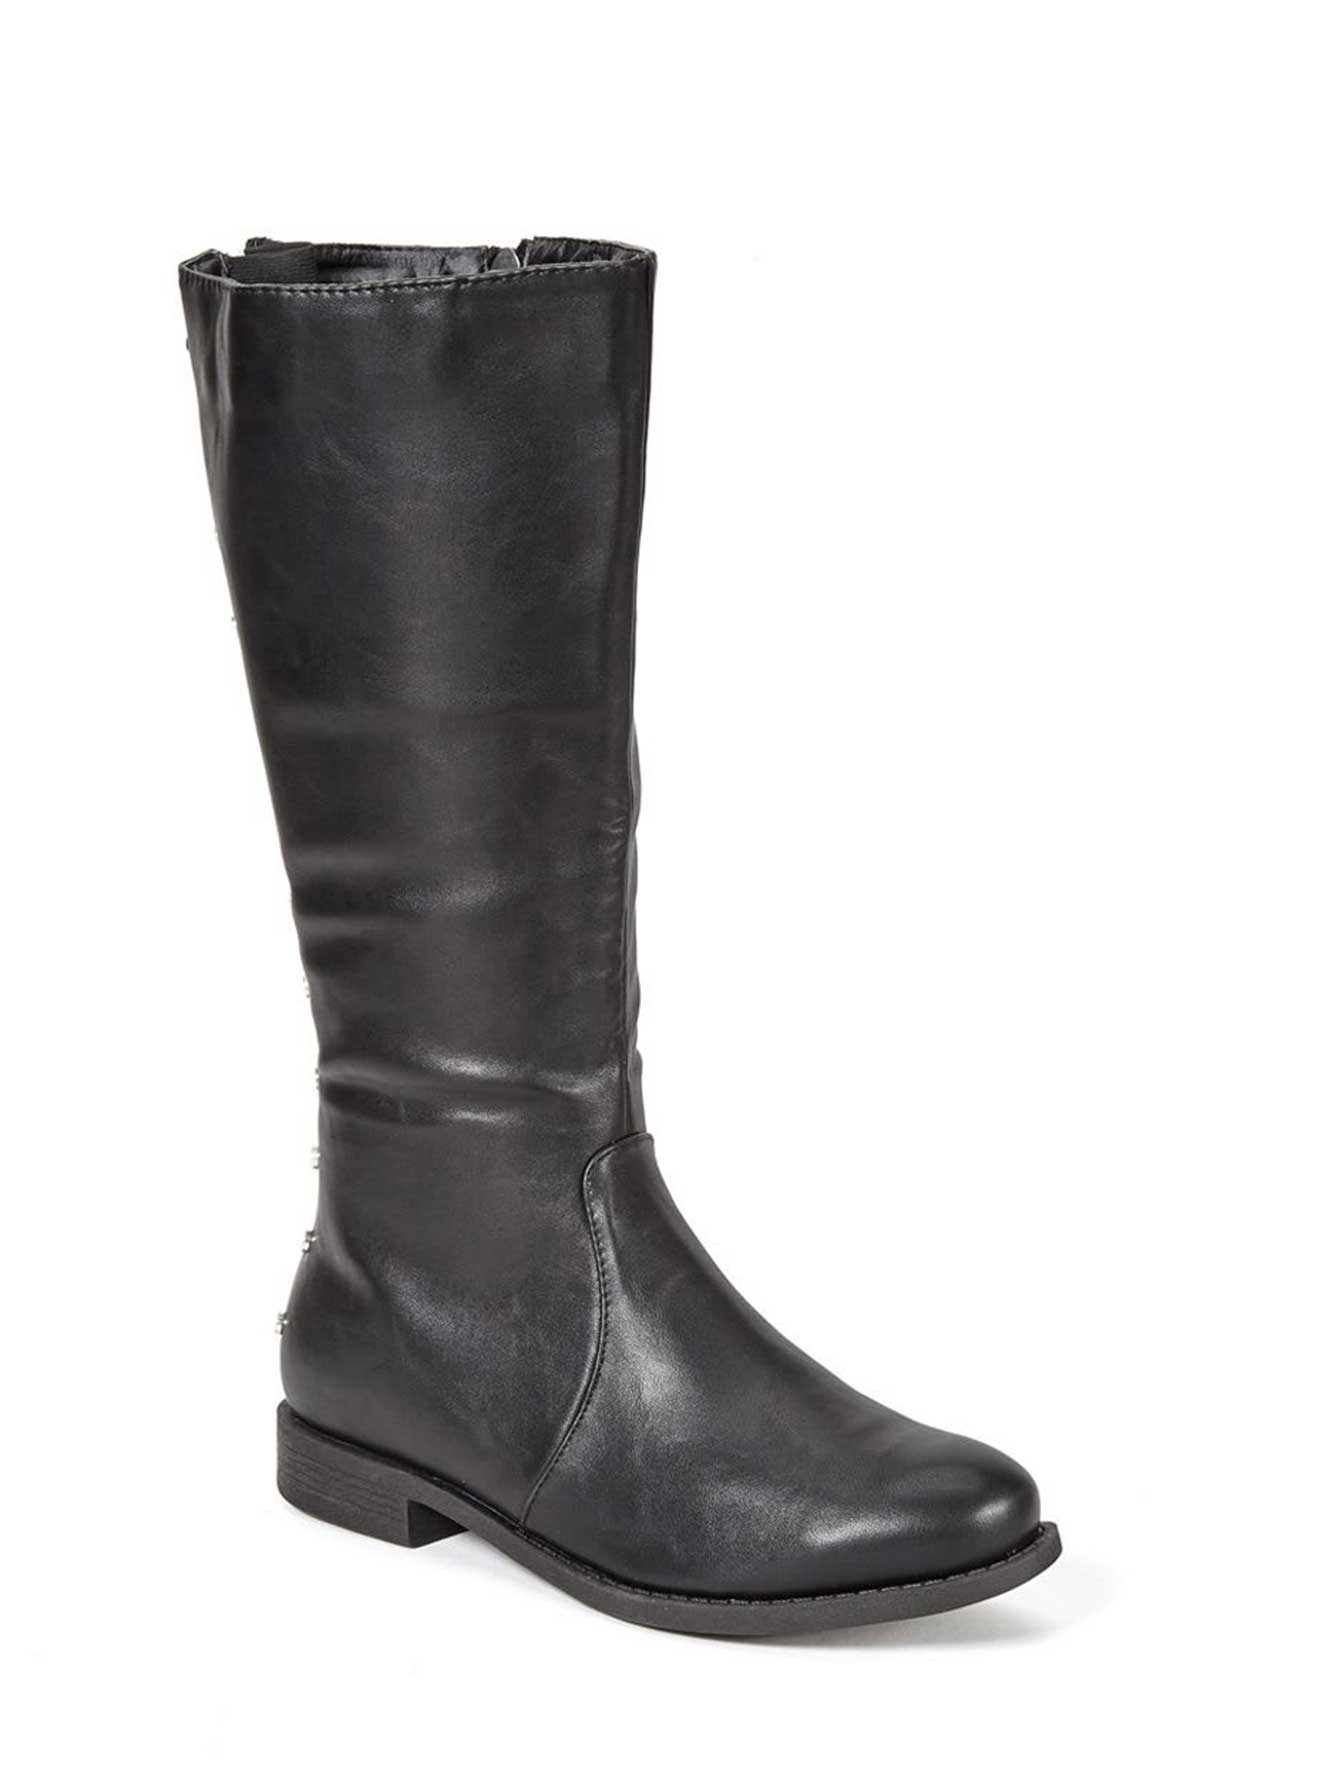 Wide-Width Wide Calf Tall Faux-Leather Boots | Penningtons